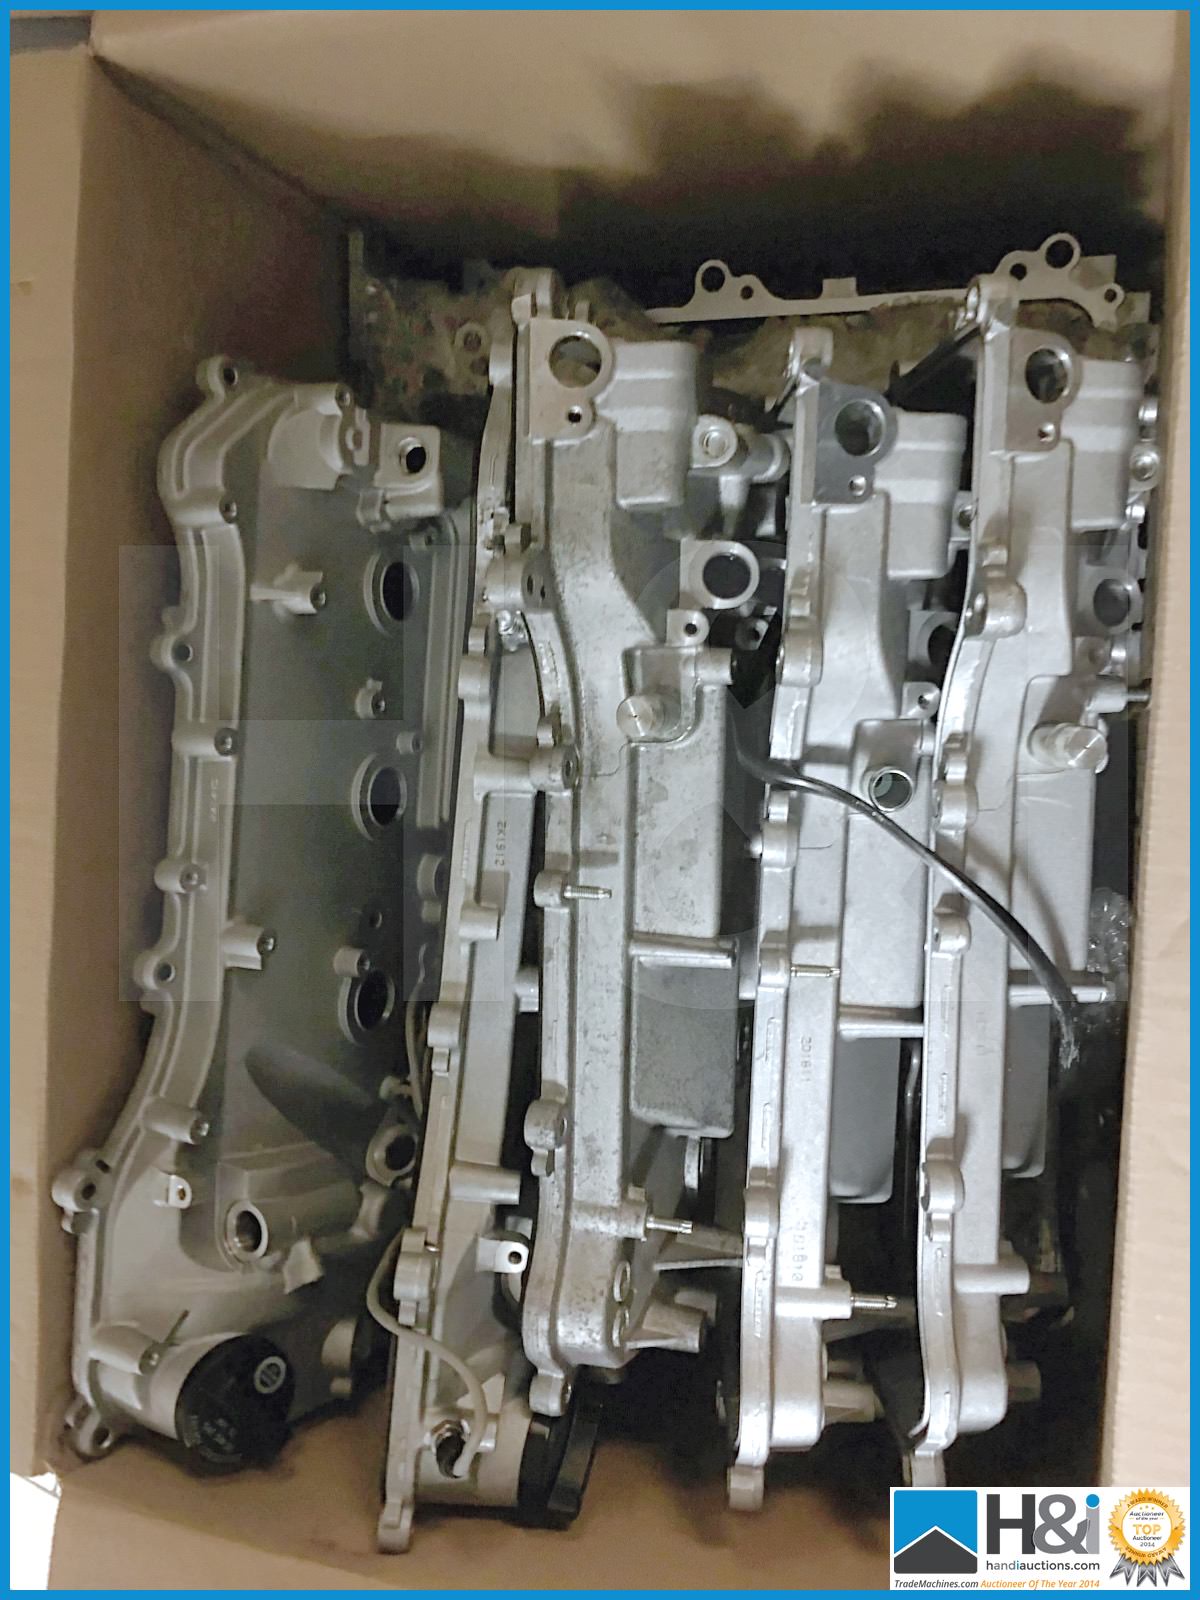 Huge qty of last remaining entire 2nd hand engine spares stock for Lotus Evora GL A, GL B and GL C. - Image 17 of 23